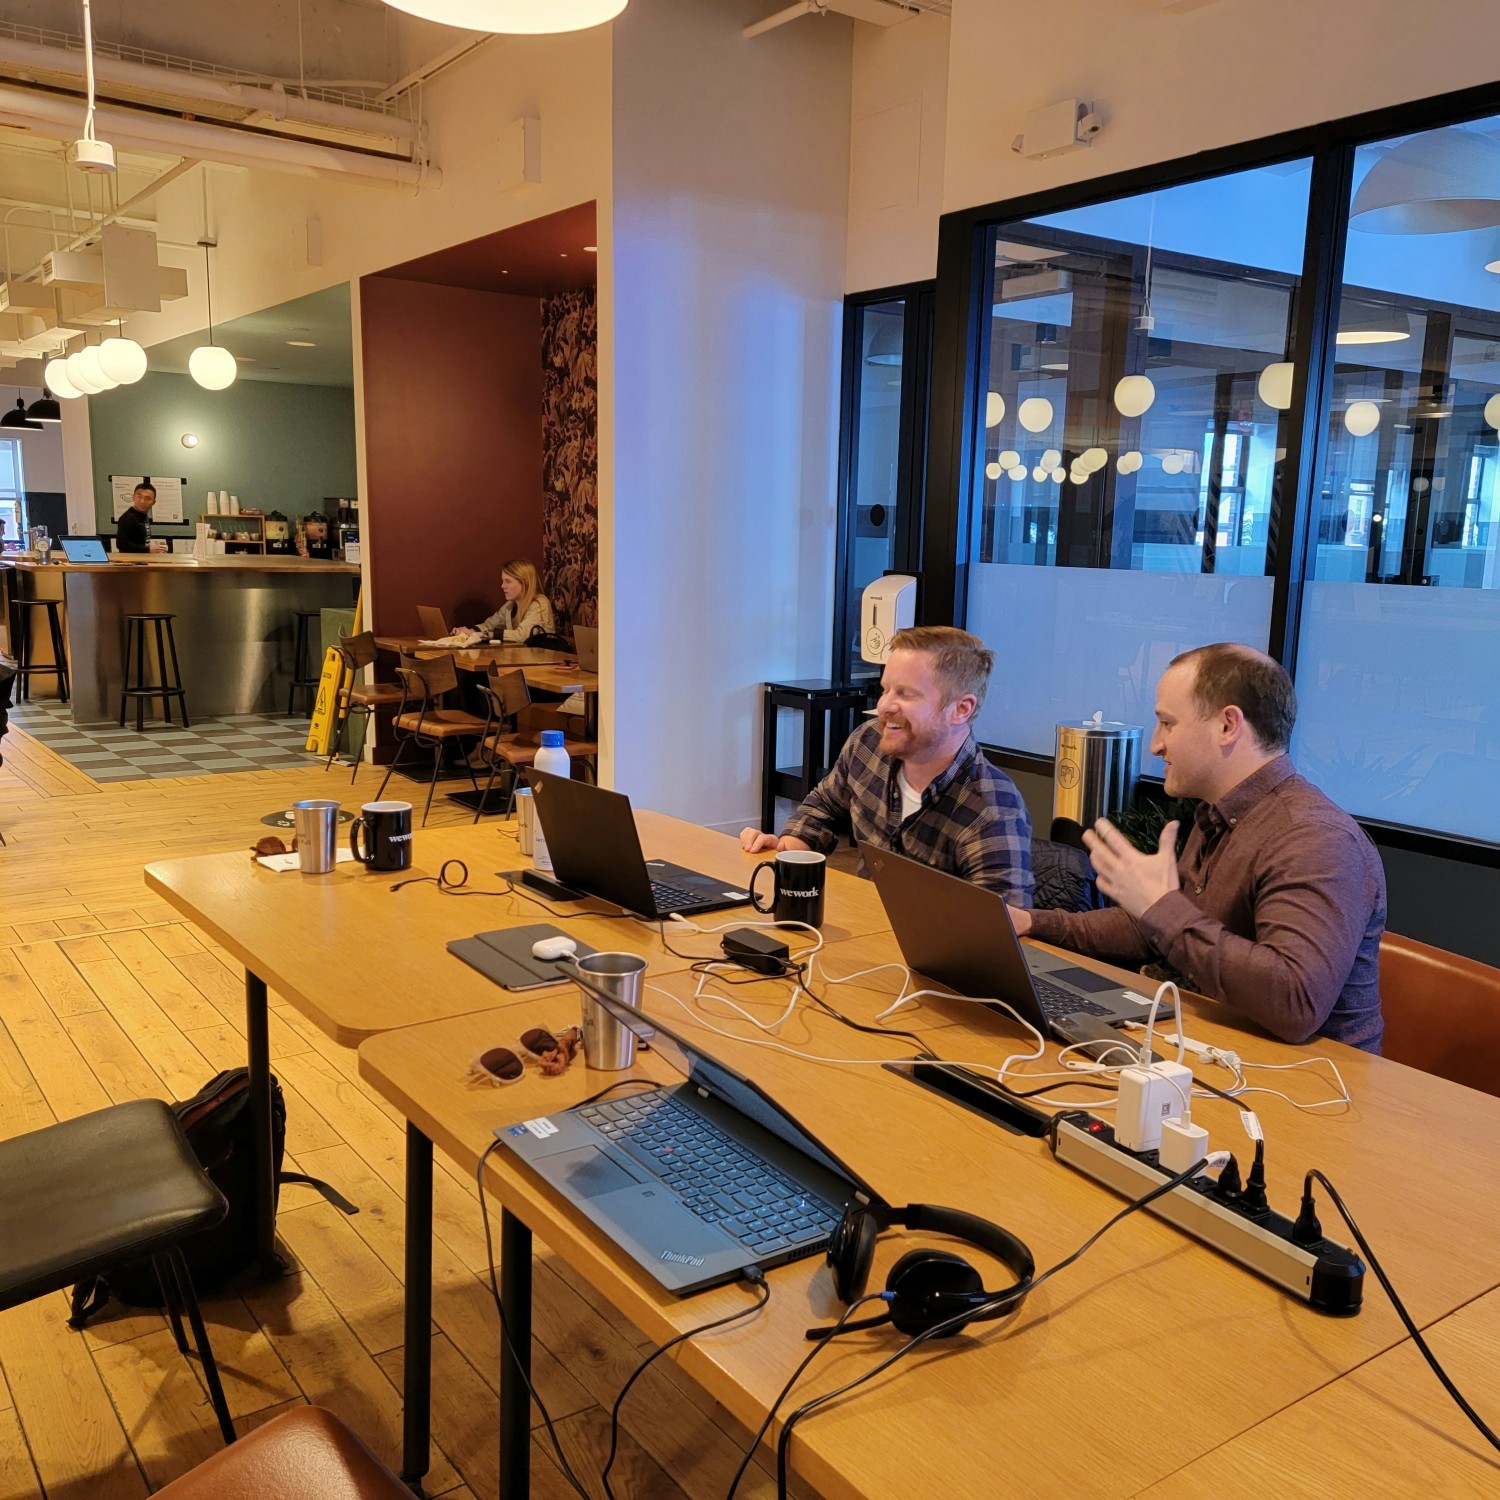 Remote workers enjoying co-working space in Boston